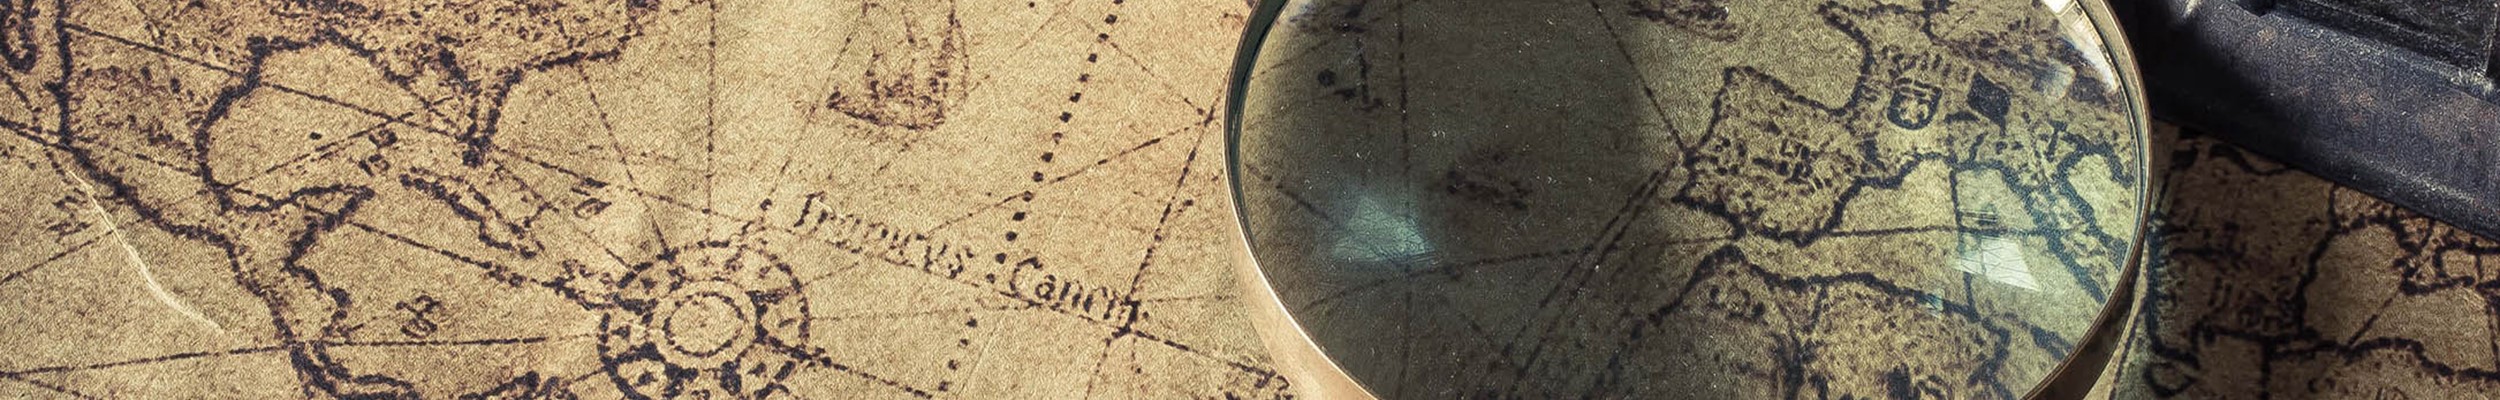 Magnifying glass on an old map